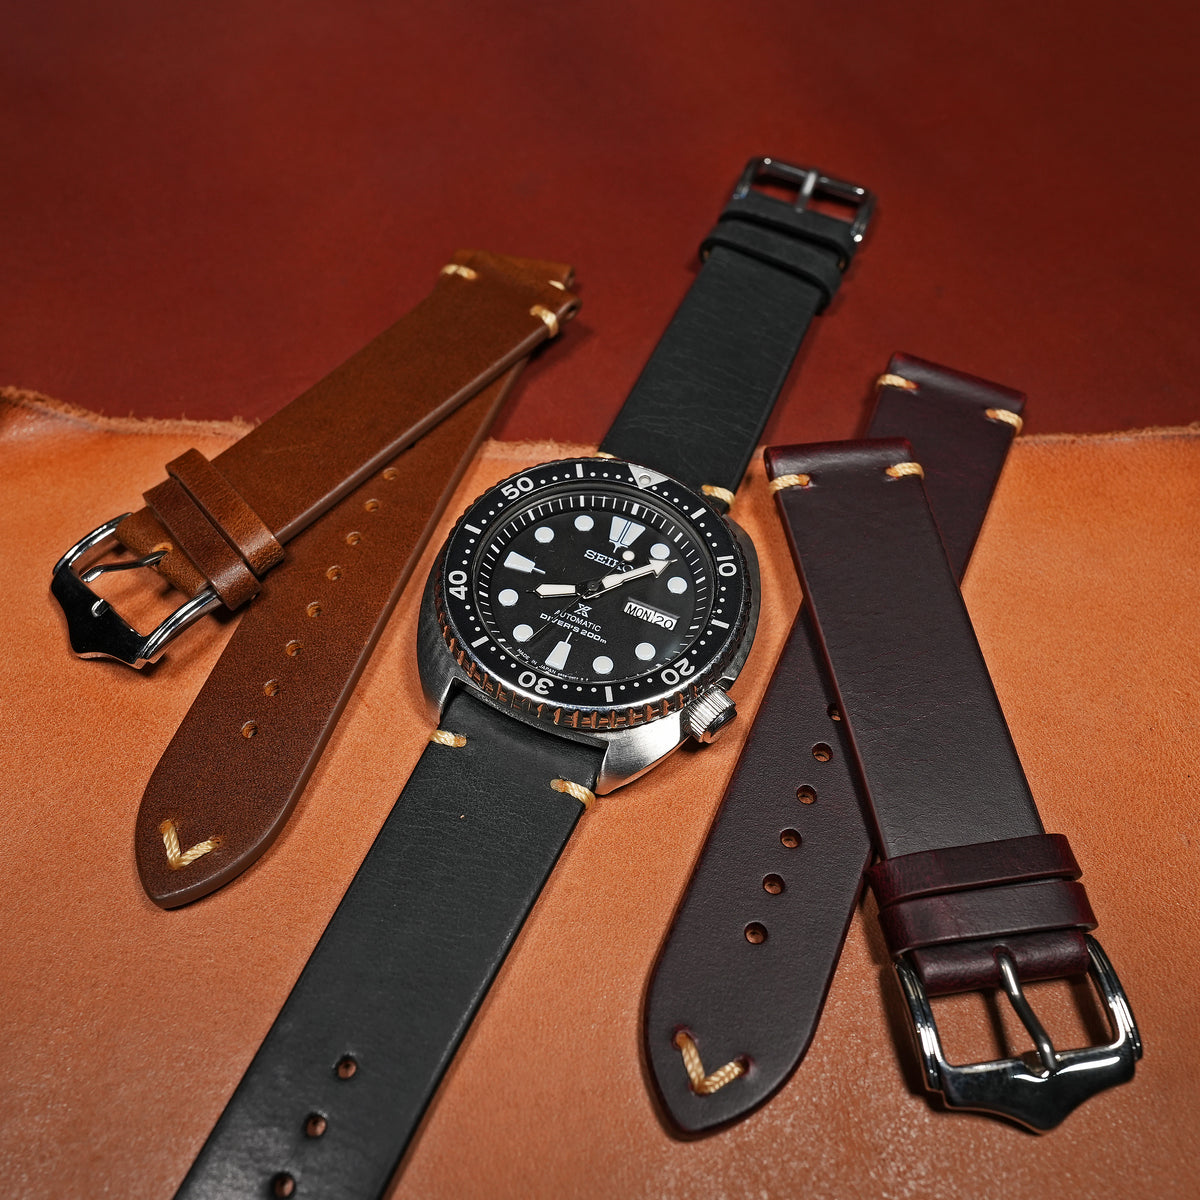 Premium Vintage Oil Waxed Leather Watch Strap in Black - Nomad Watch Works MY